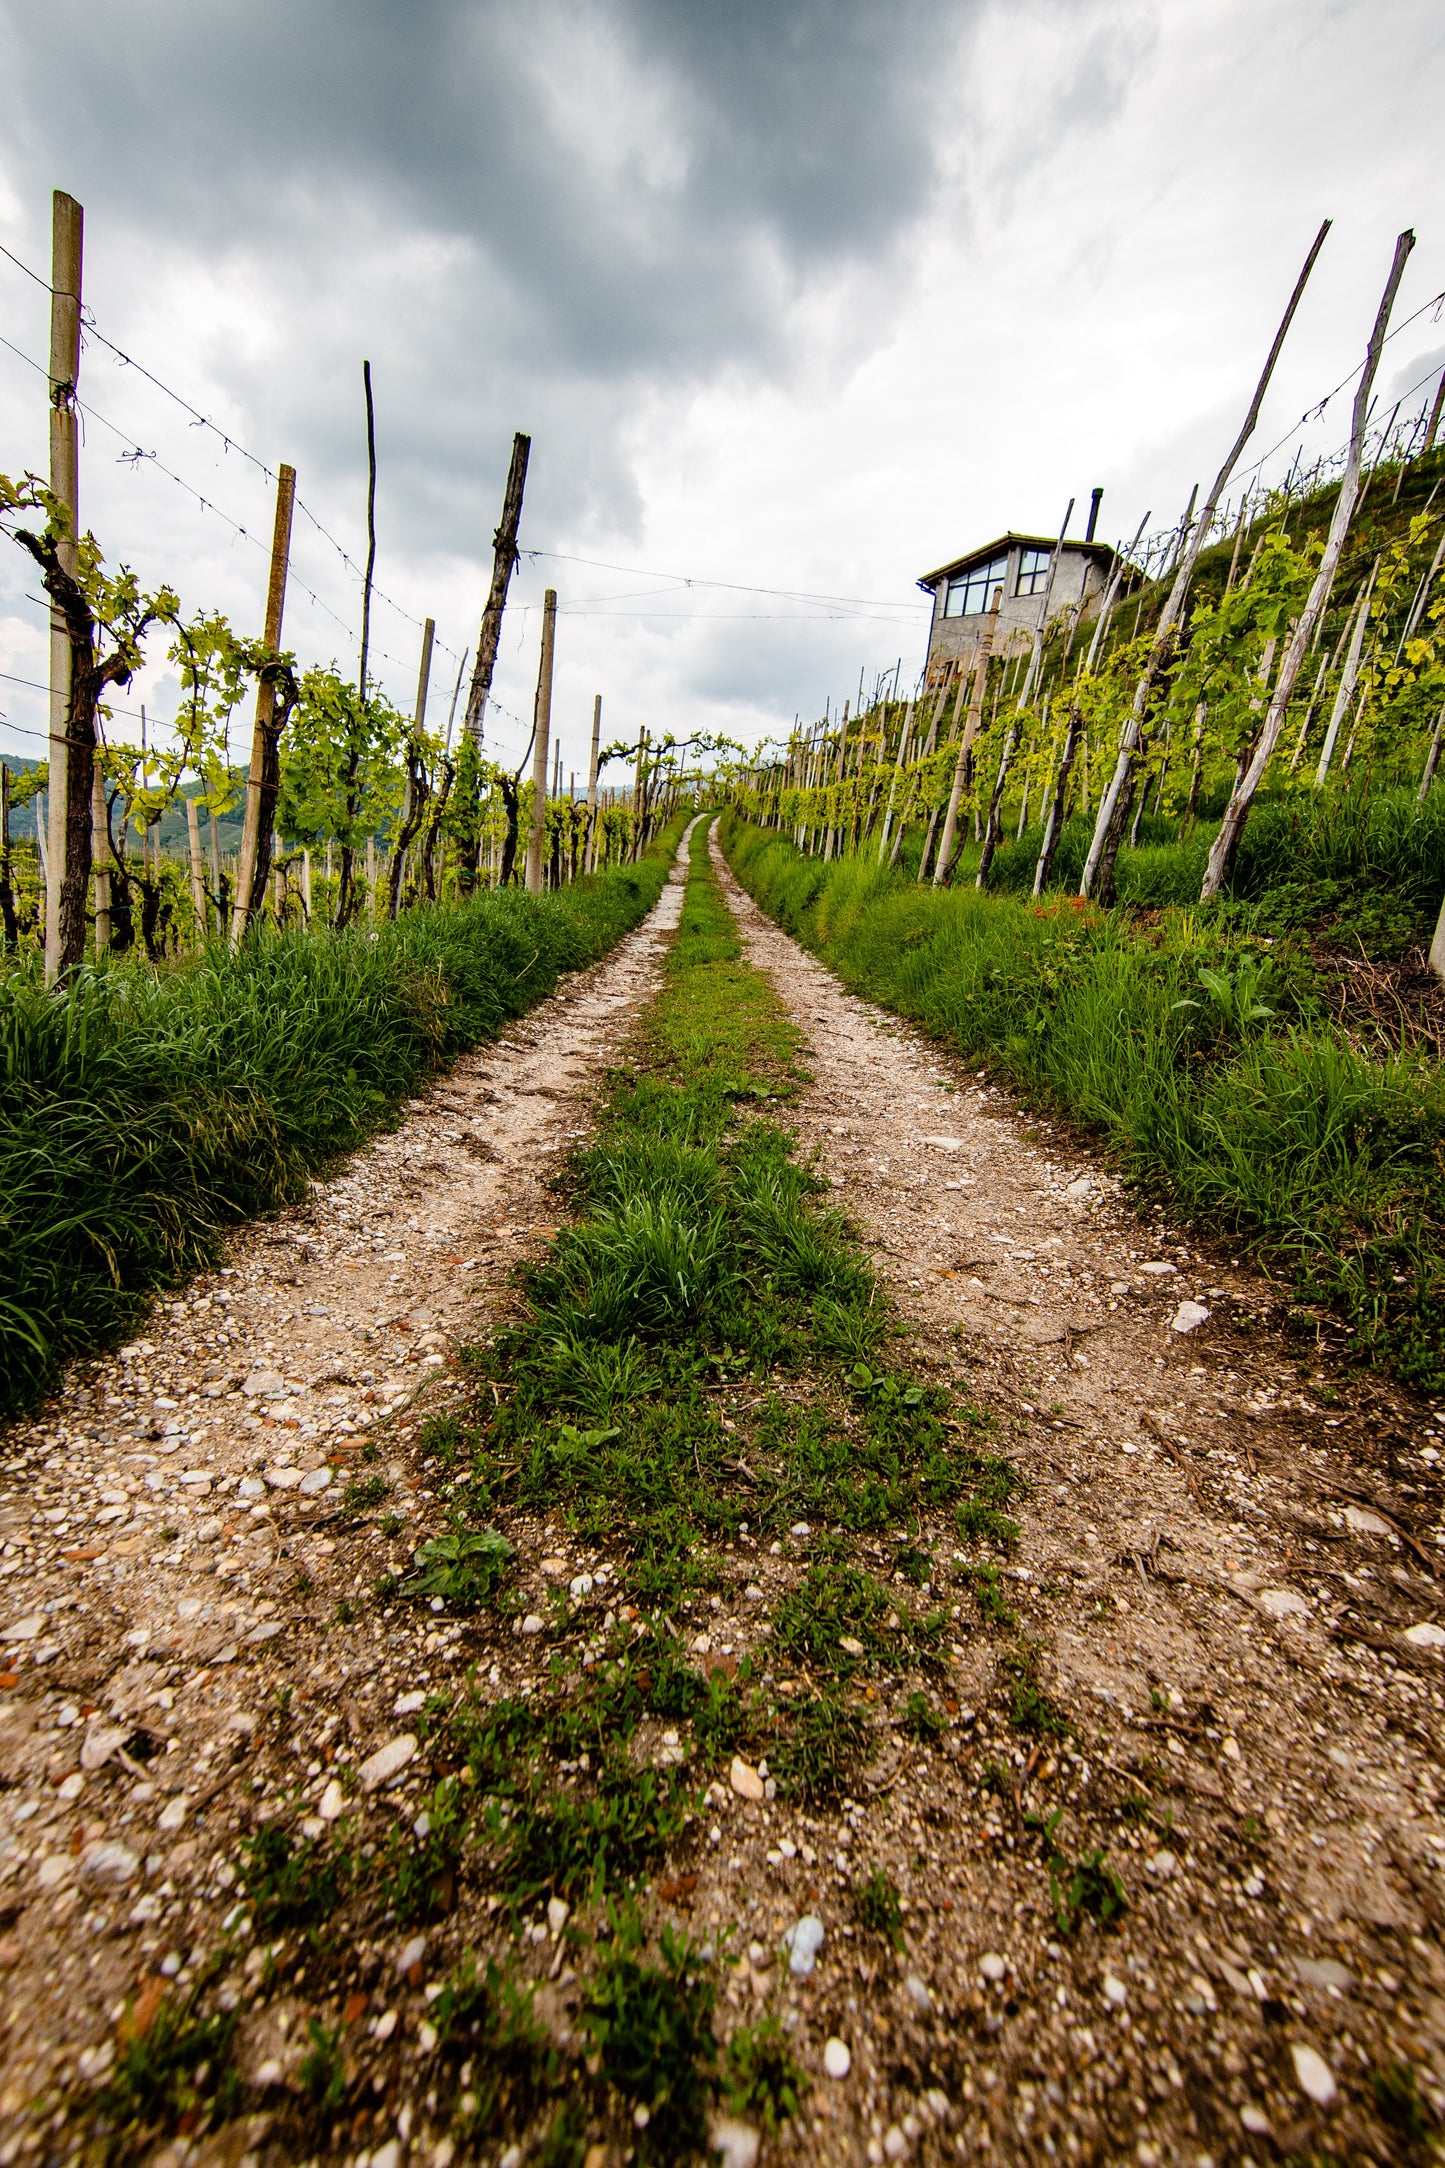 Visit to the prosecco hills with tasting